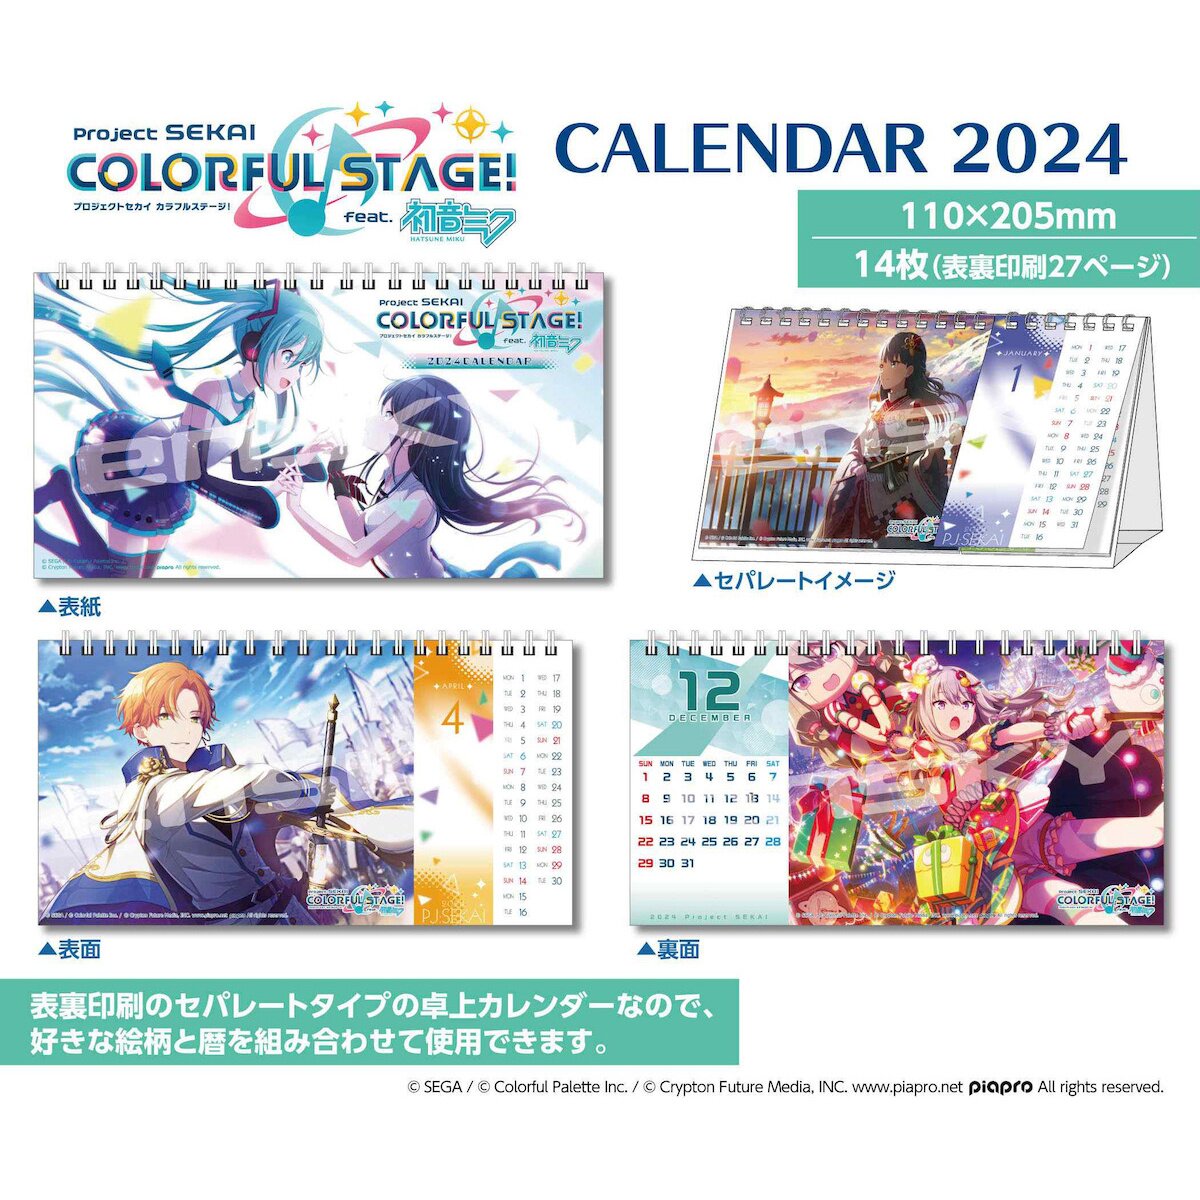 Project Sekai Colorful Stage! feat. Hatsune Miku 2024 Separated